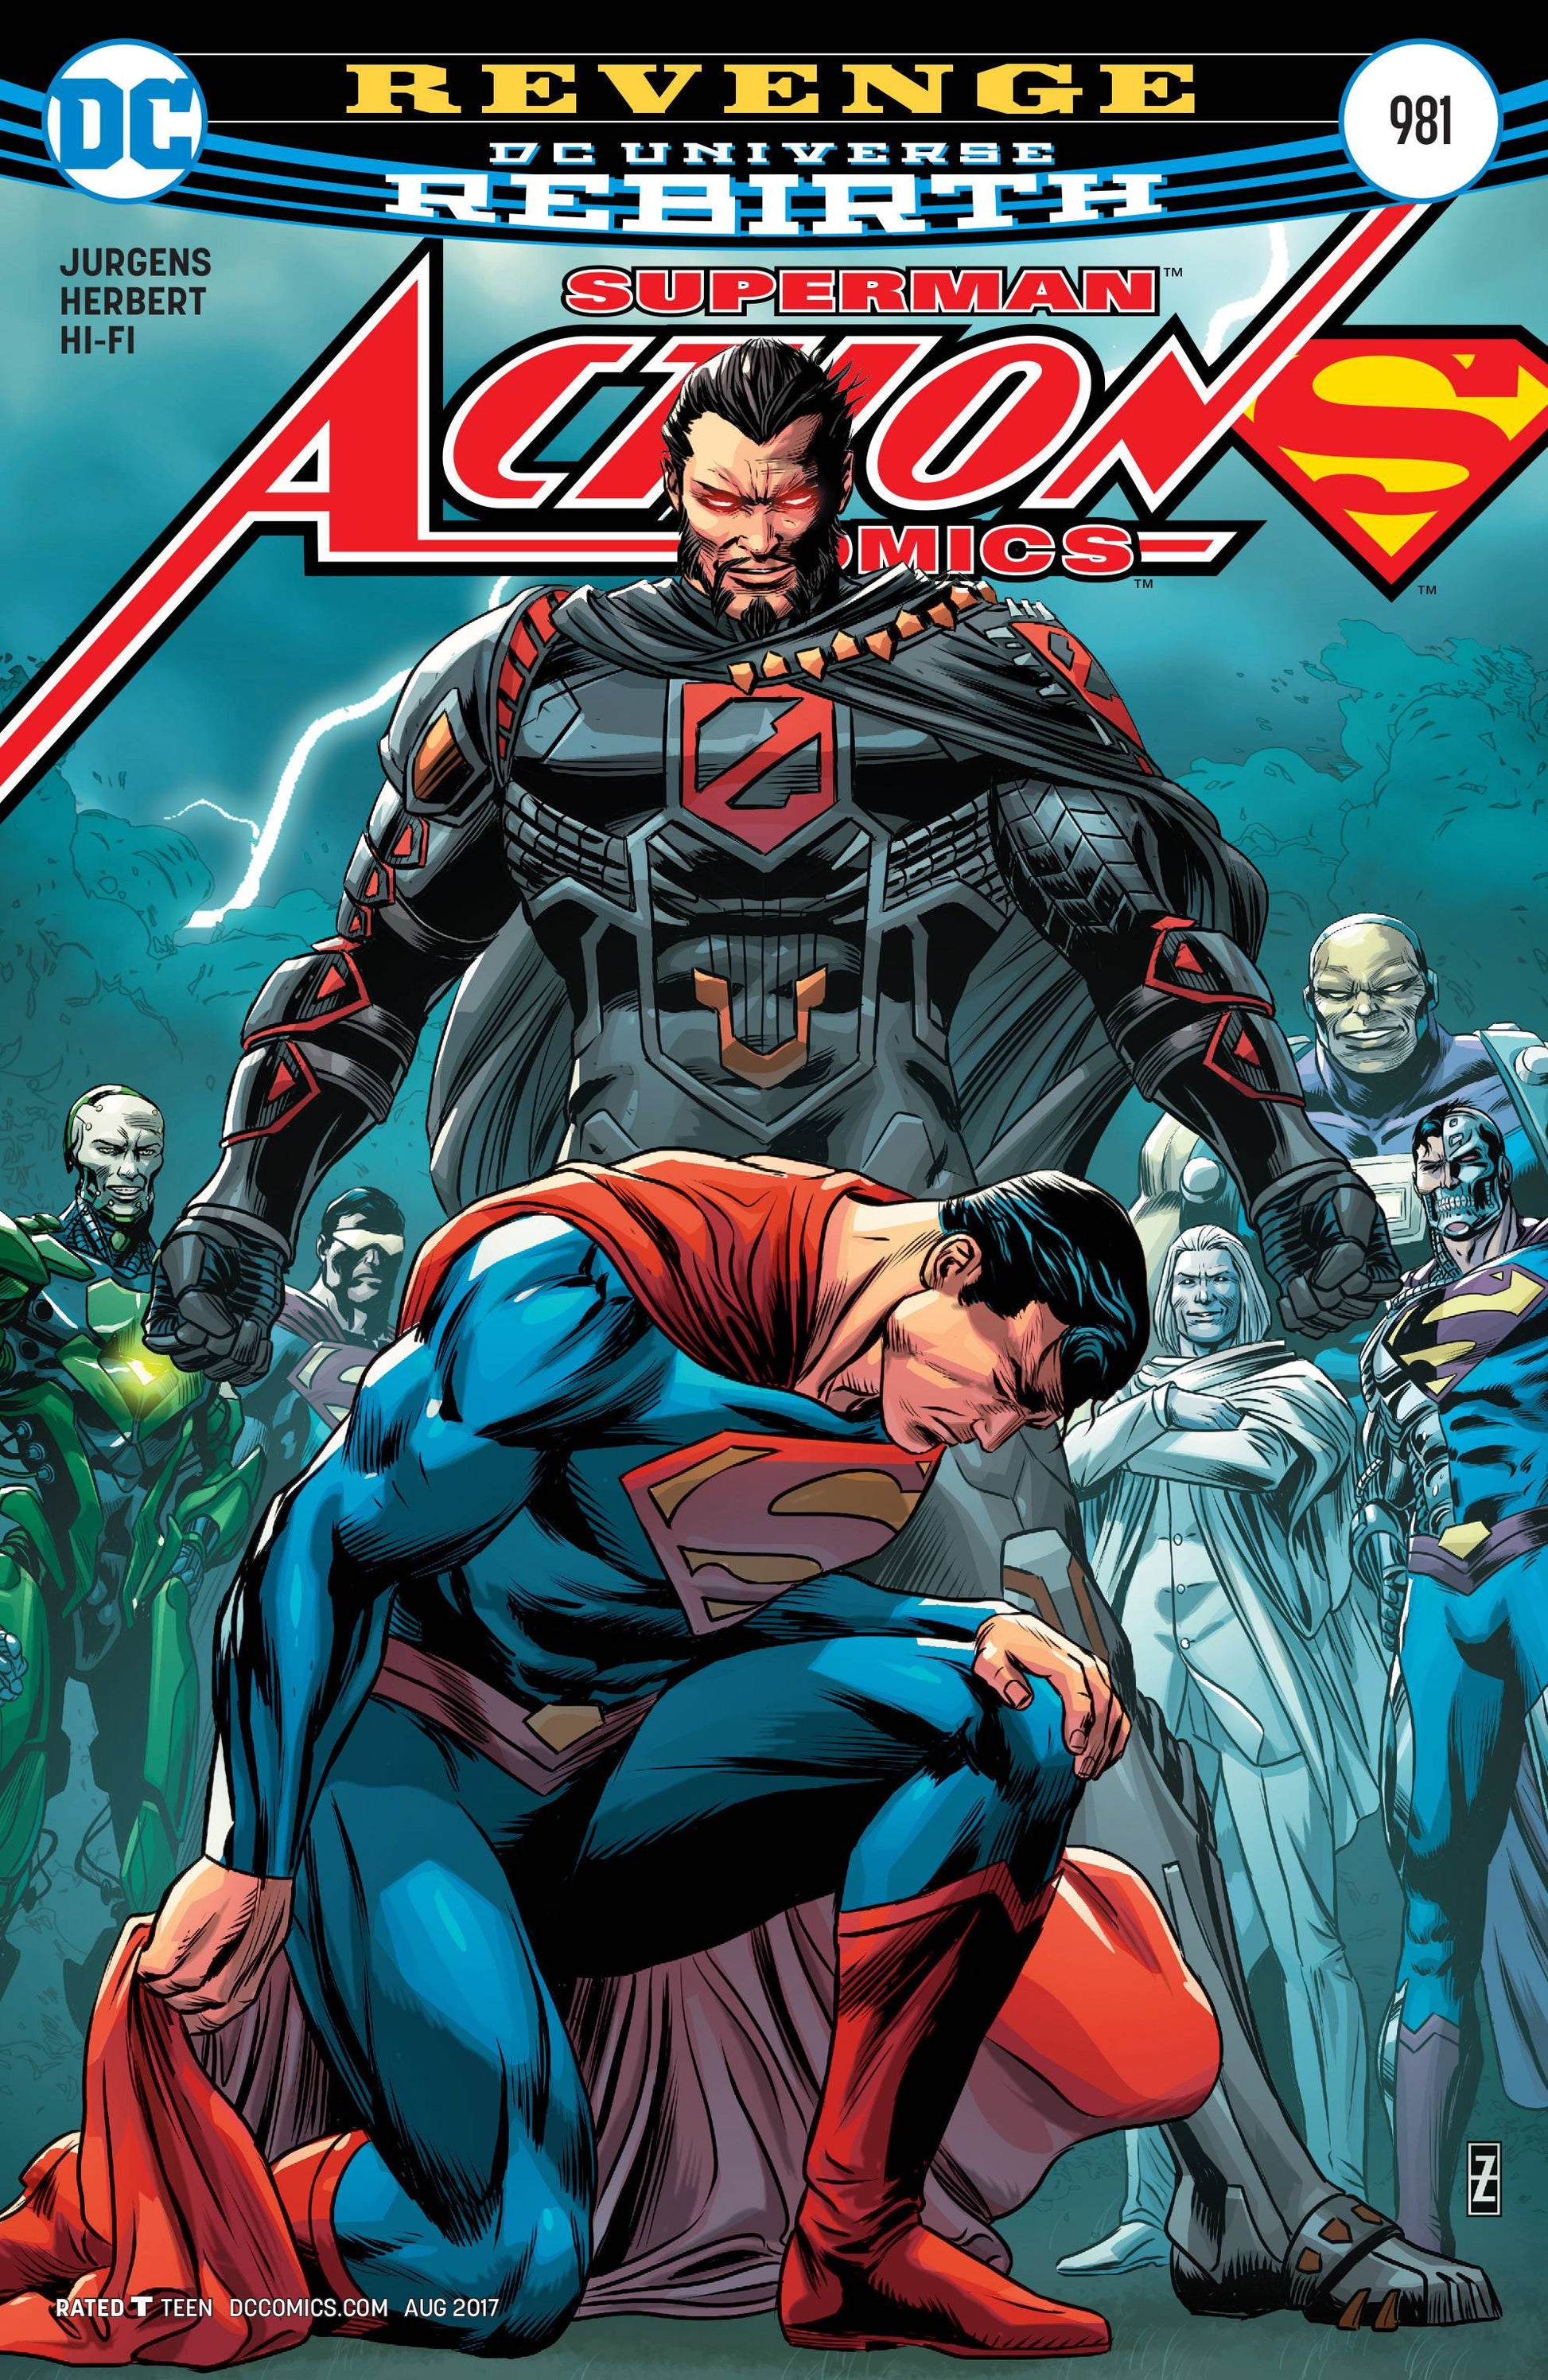 ACTION COMICS #981 COVER